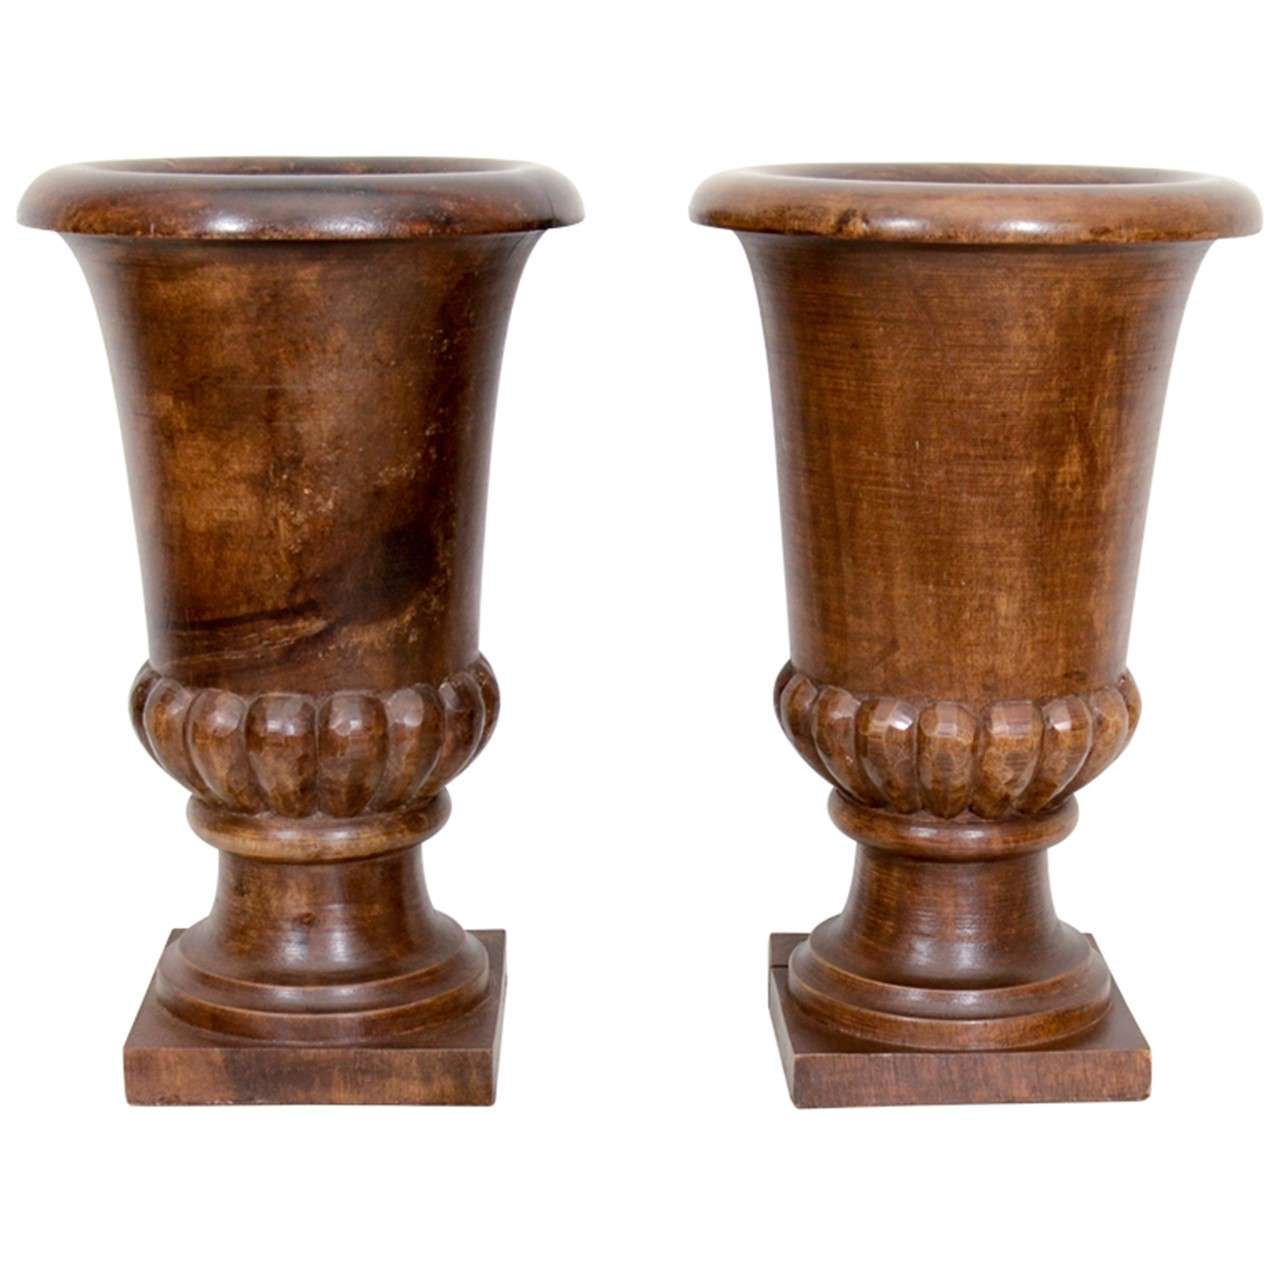 Pair of Antique French Wooden Urns, circa Early 1900s